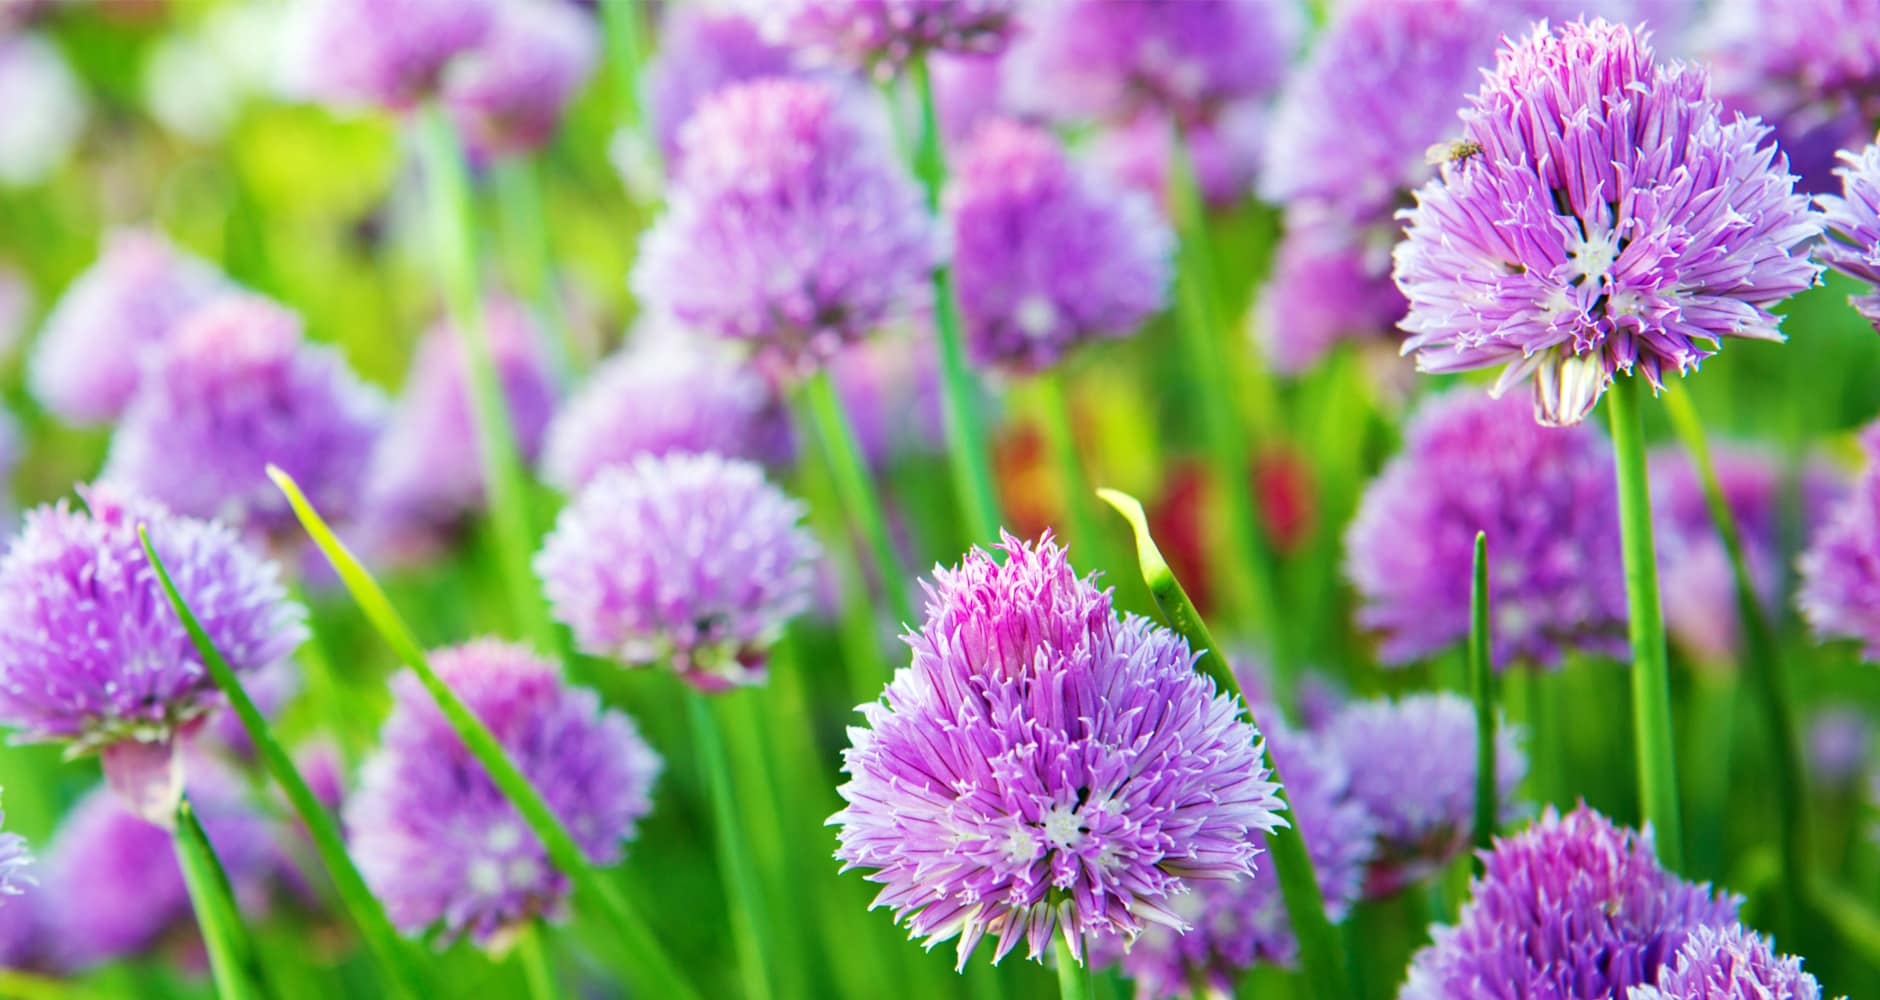 chive blossoms are edible 